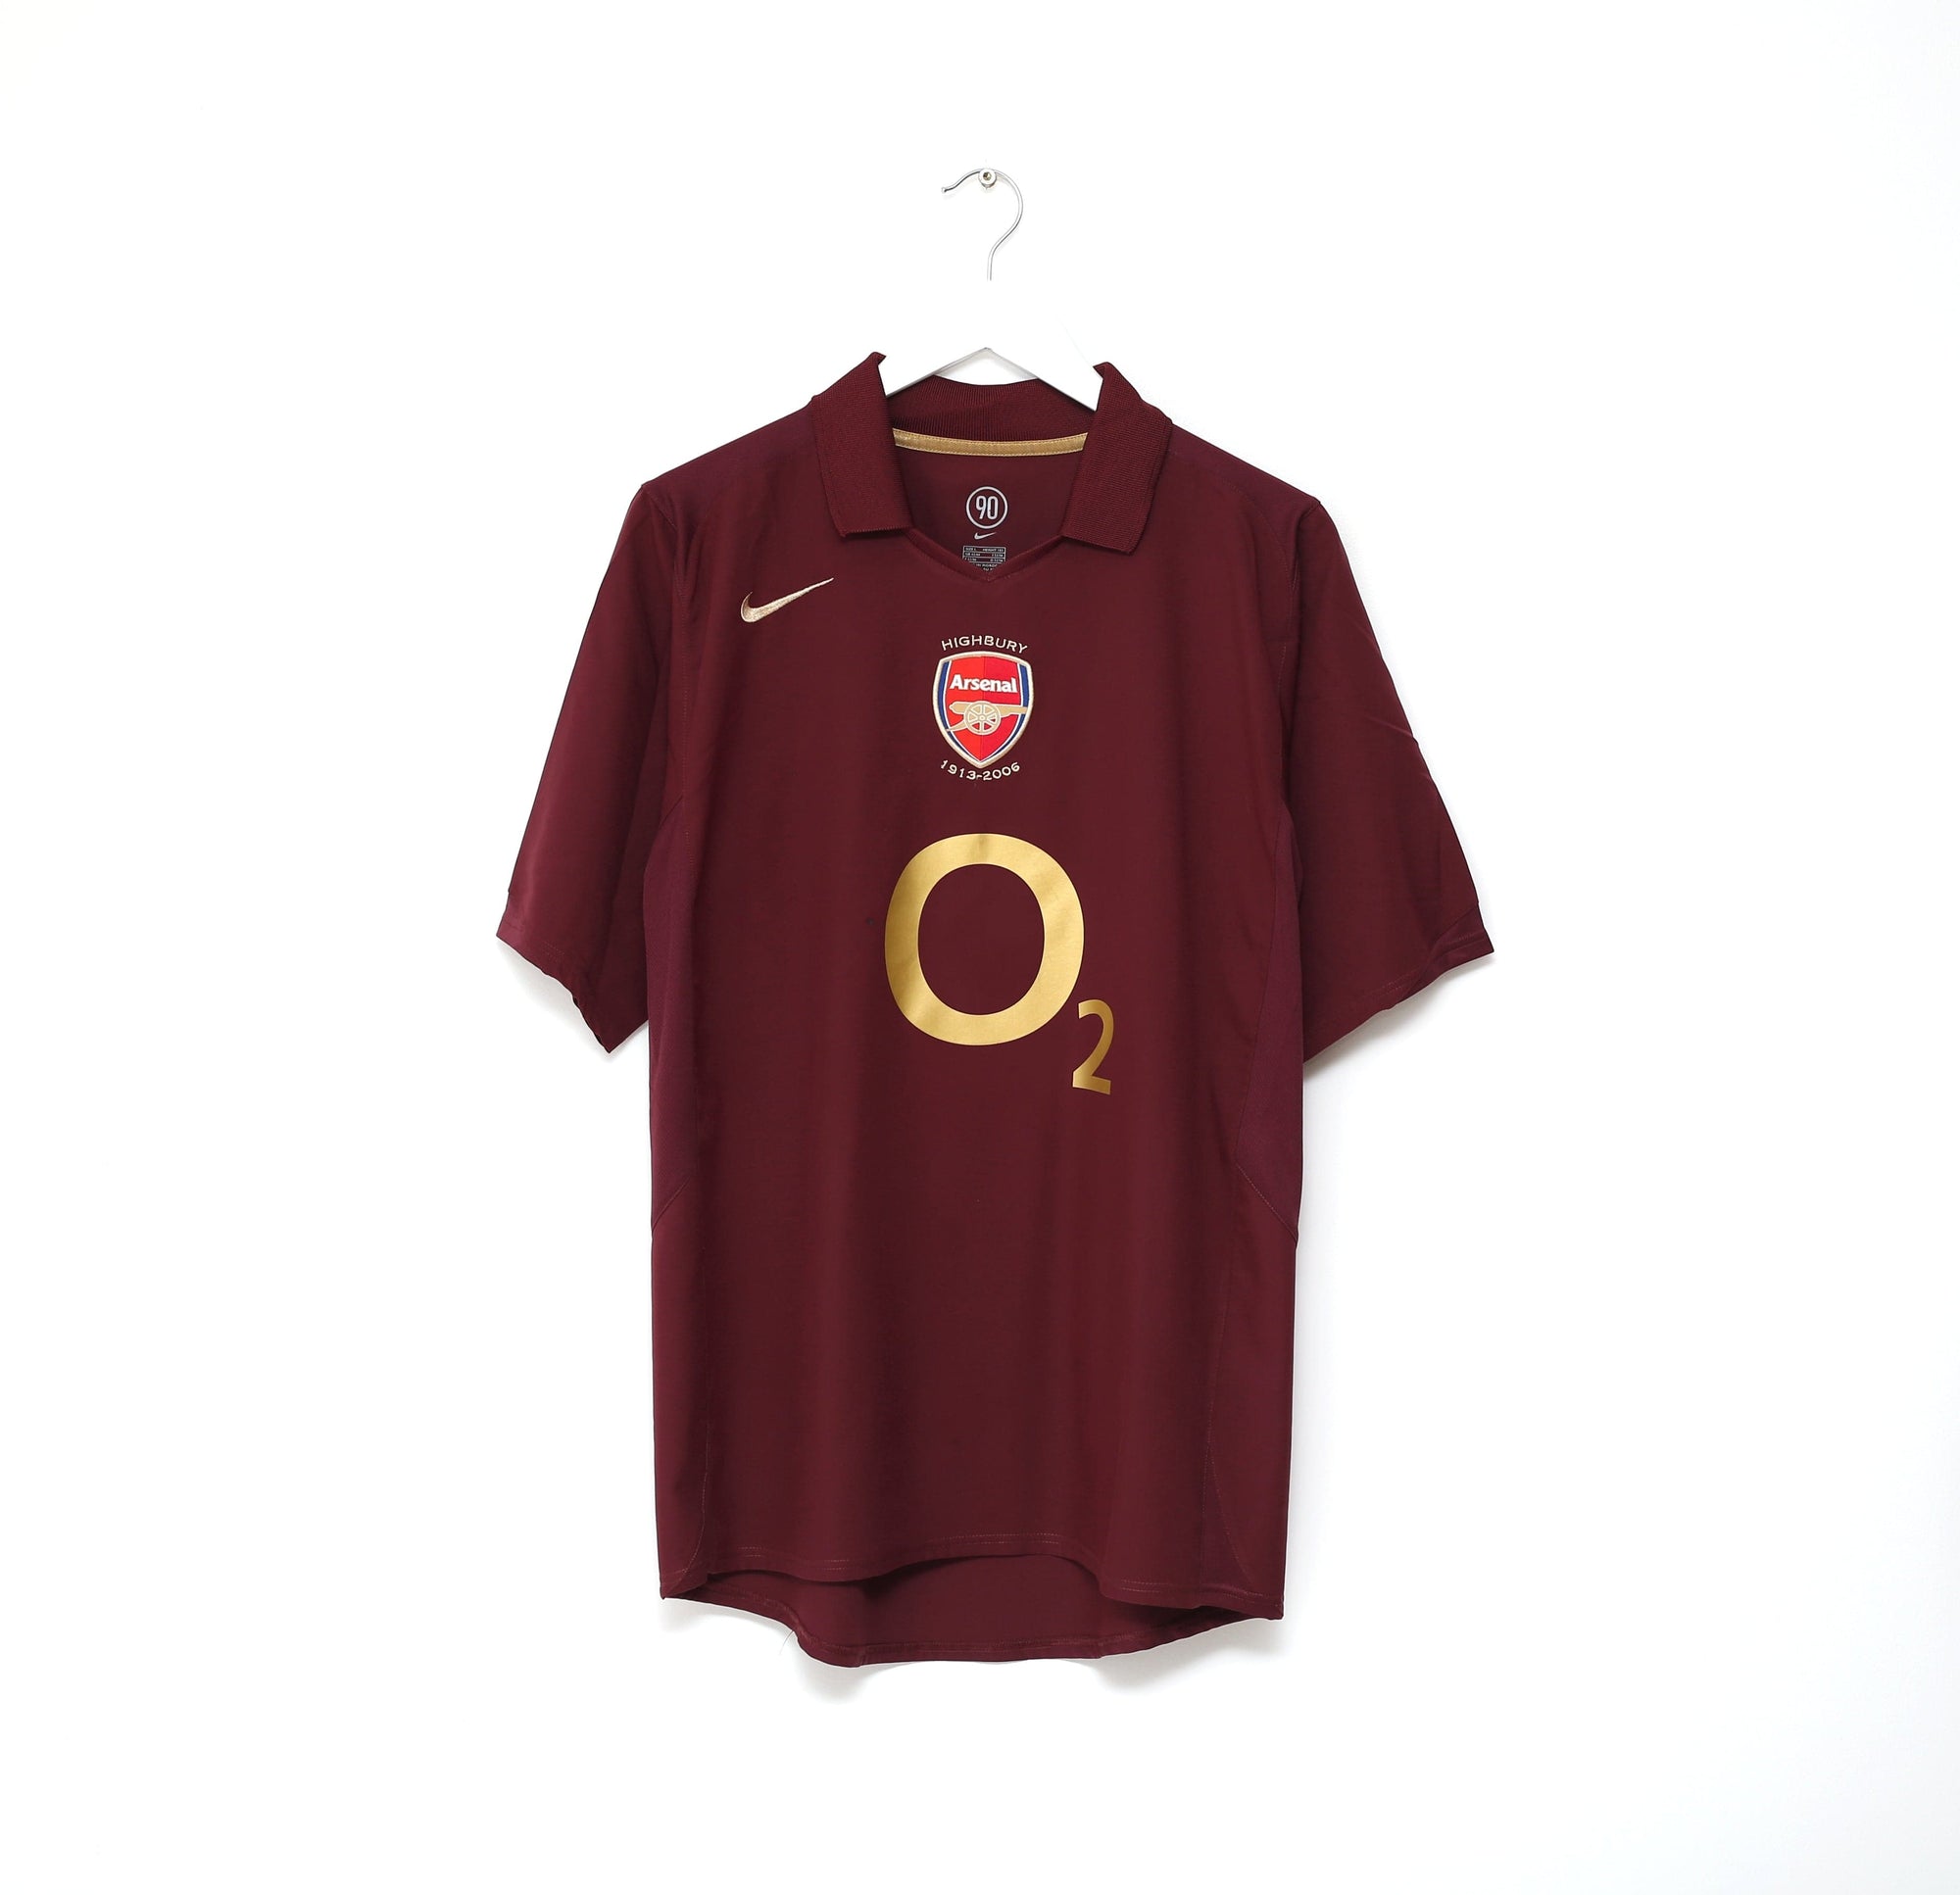 2005/06 HENRY #14 Arsenal Vintage Nike UCL Home Football Shirt Jersey (L)